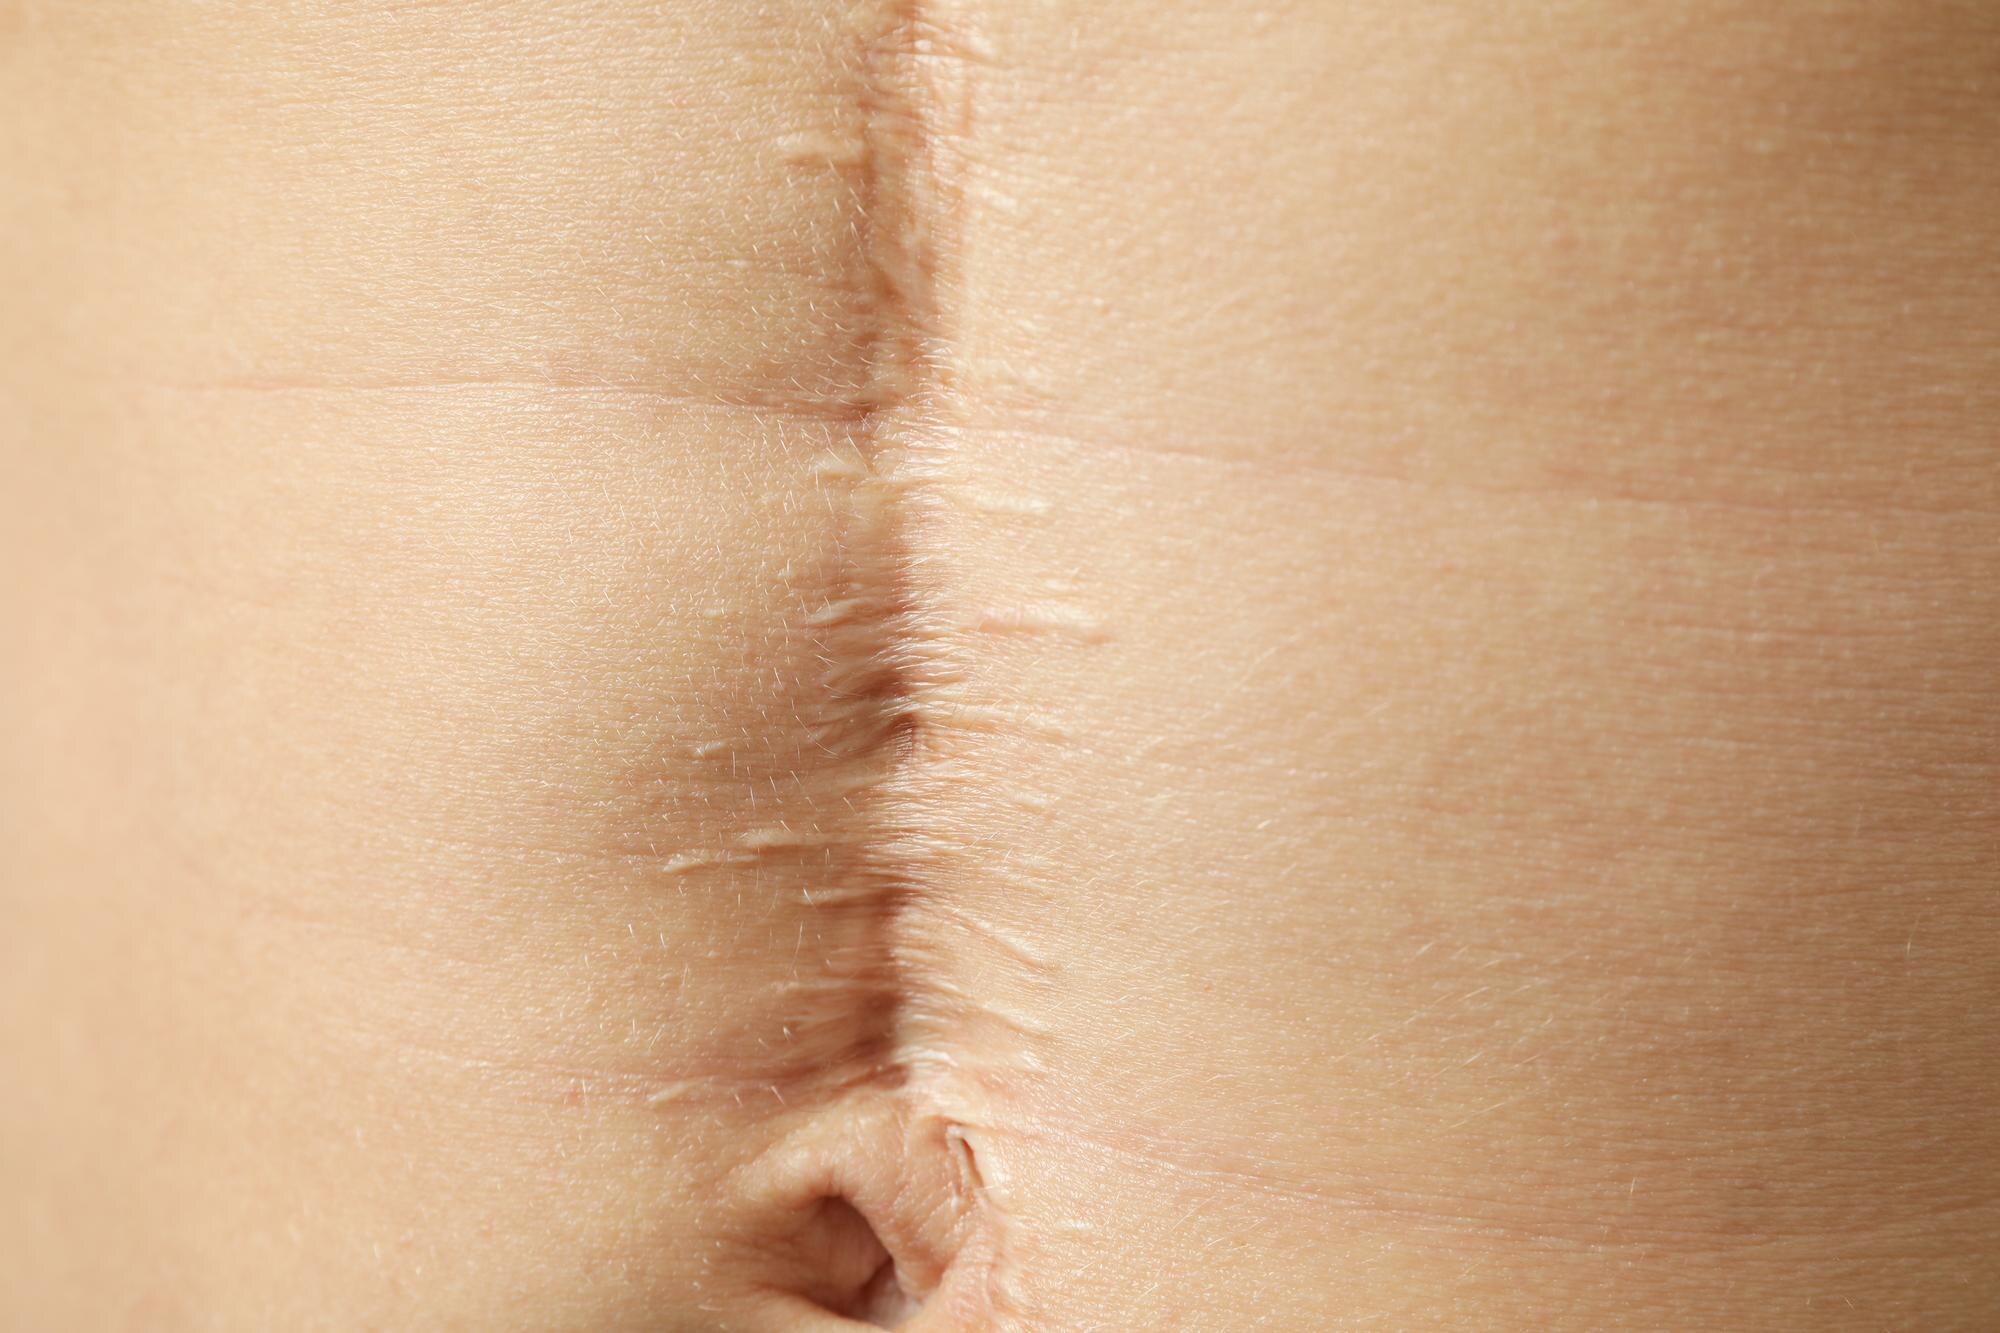 stomach-young-man-with-scar-close-up_185193-79790